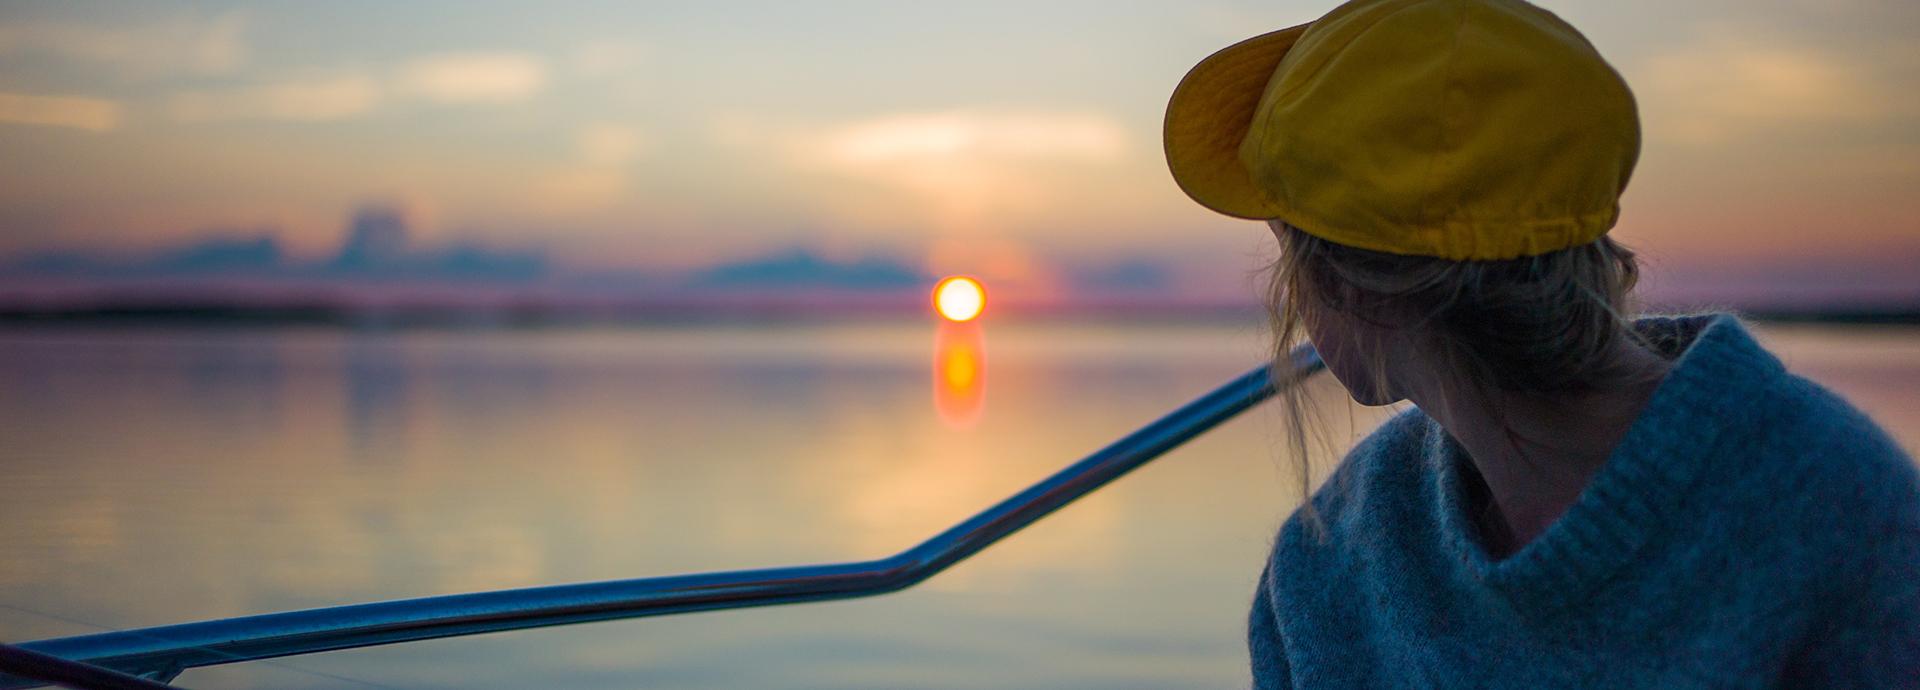 A person wearing a yellow cap sitting a boat looking at a sun setting behind a lake